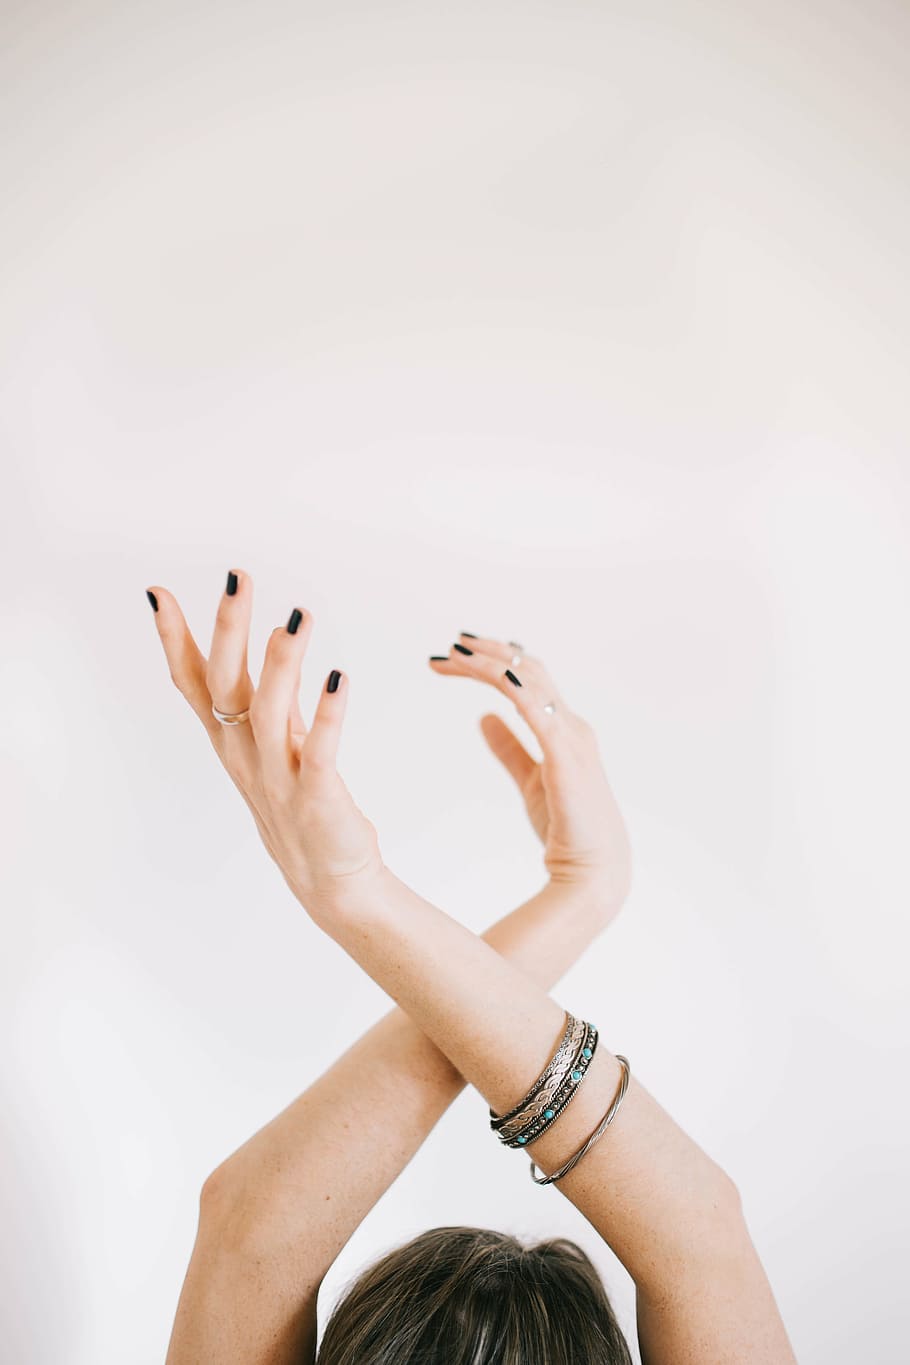 person, wearing, bangles, silver-colored ring, hands, woman, girl, nail polish, jewelry, one woman only